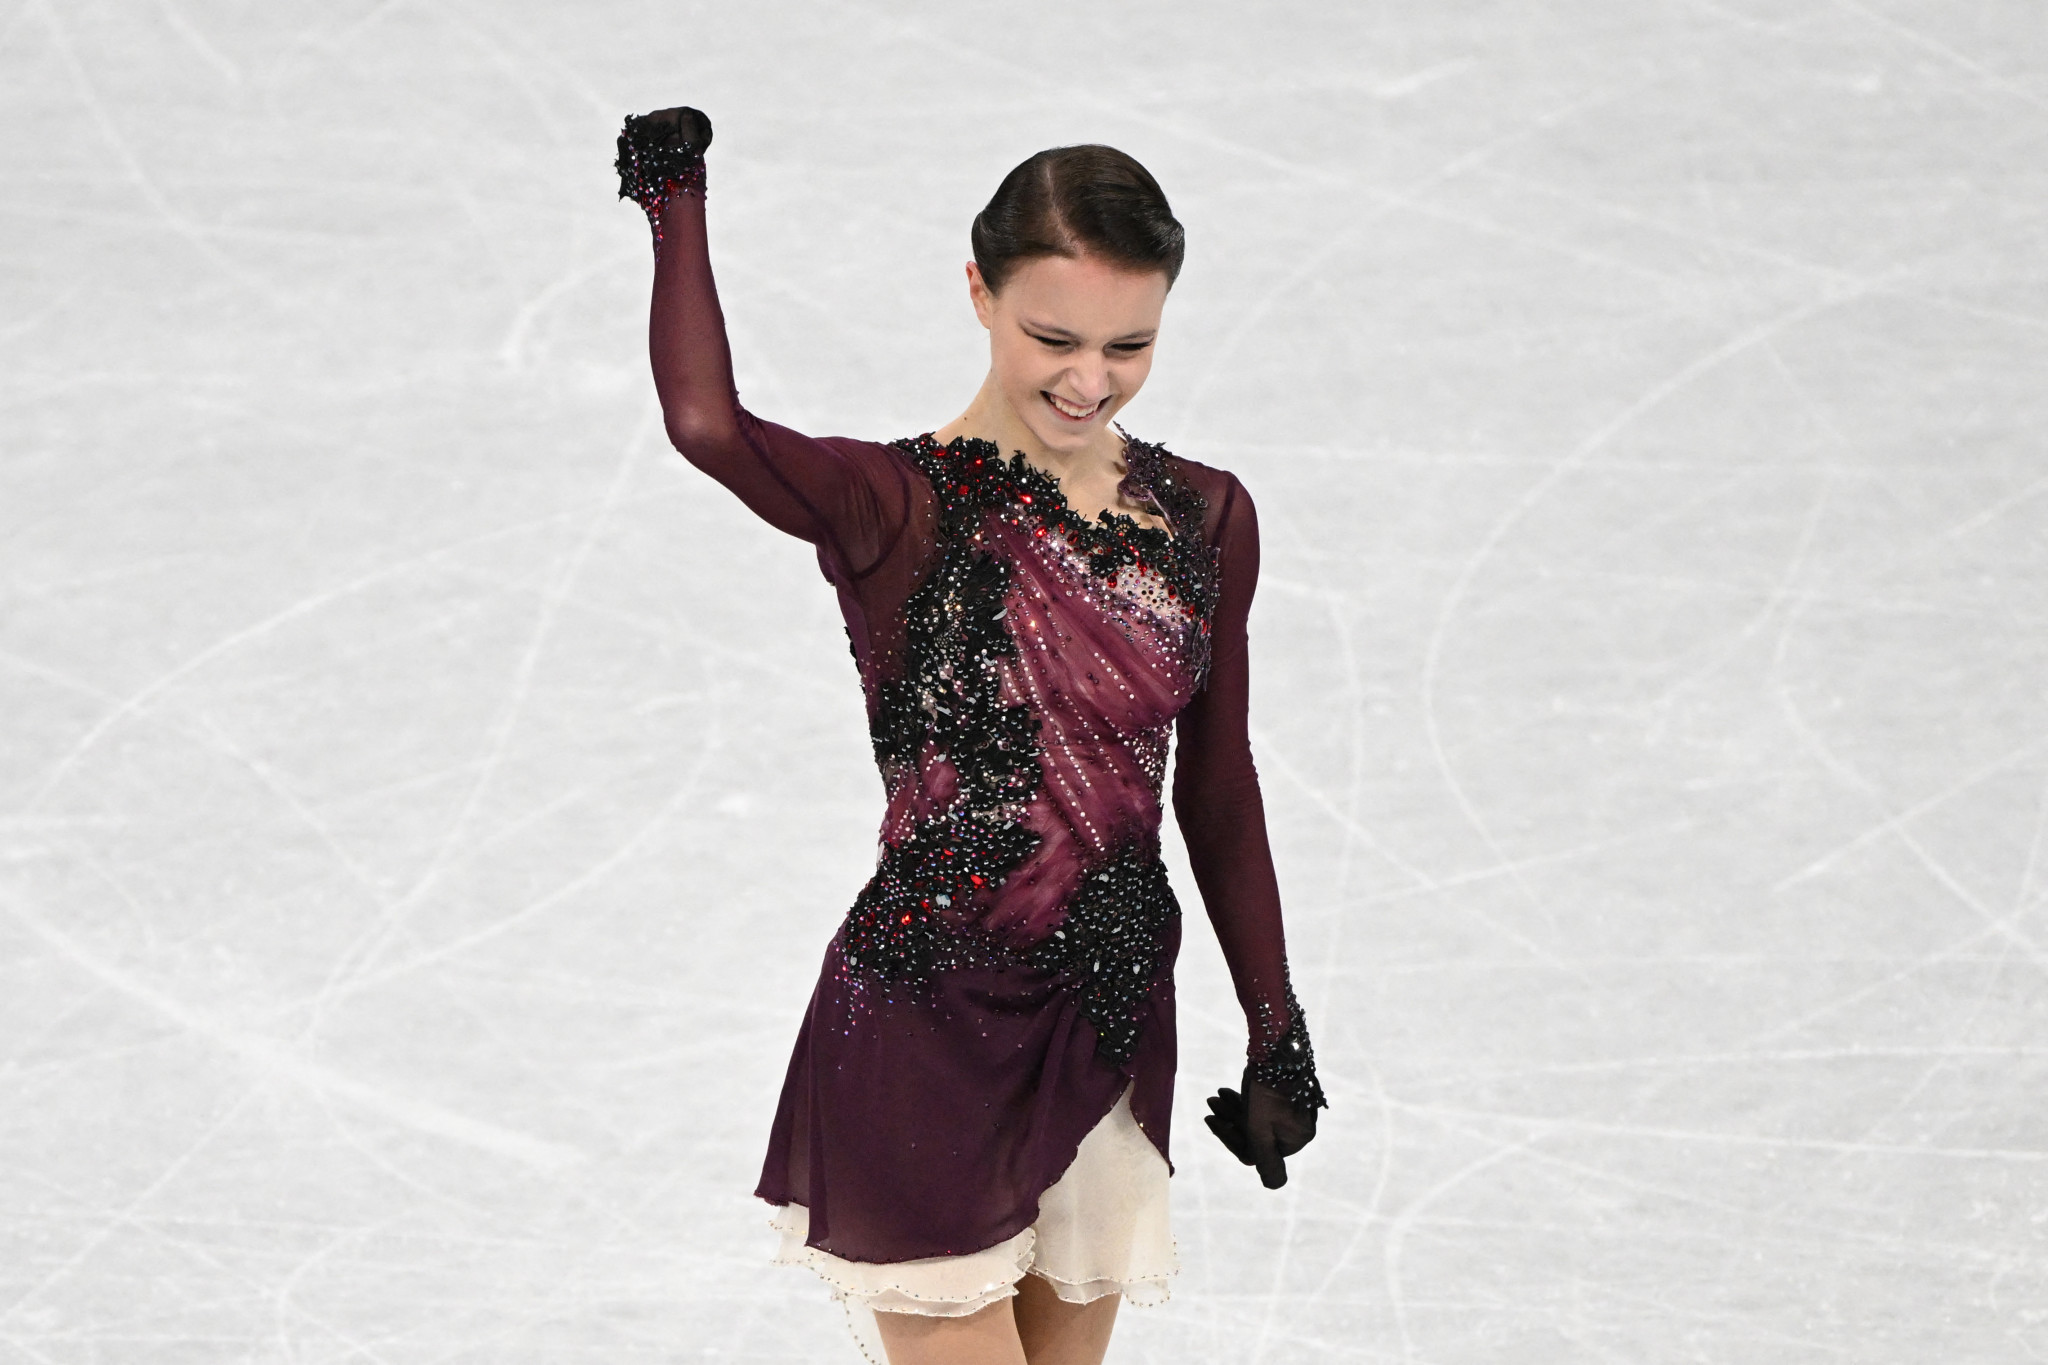 Instead it was fellow Russian Olympic Committee skater Anna Shcherbakova who claimed gold ©Getty Images